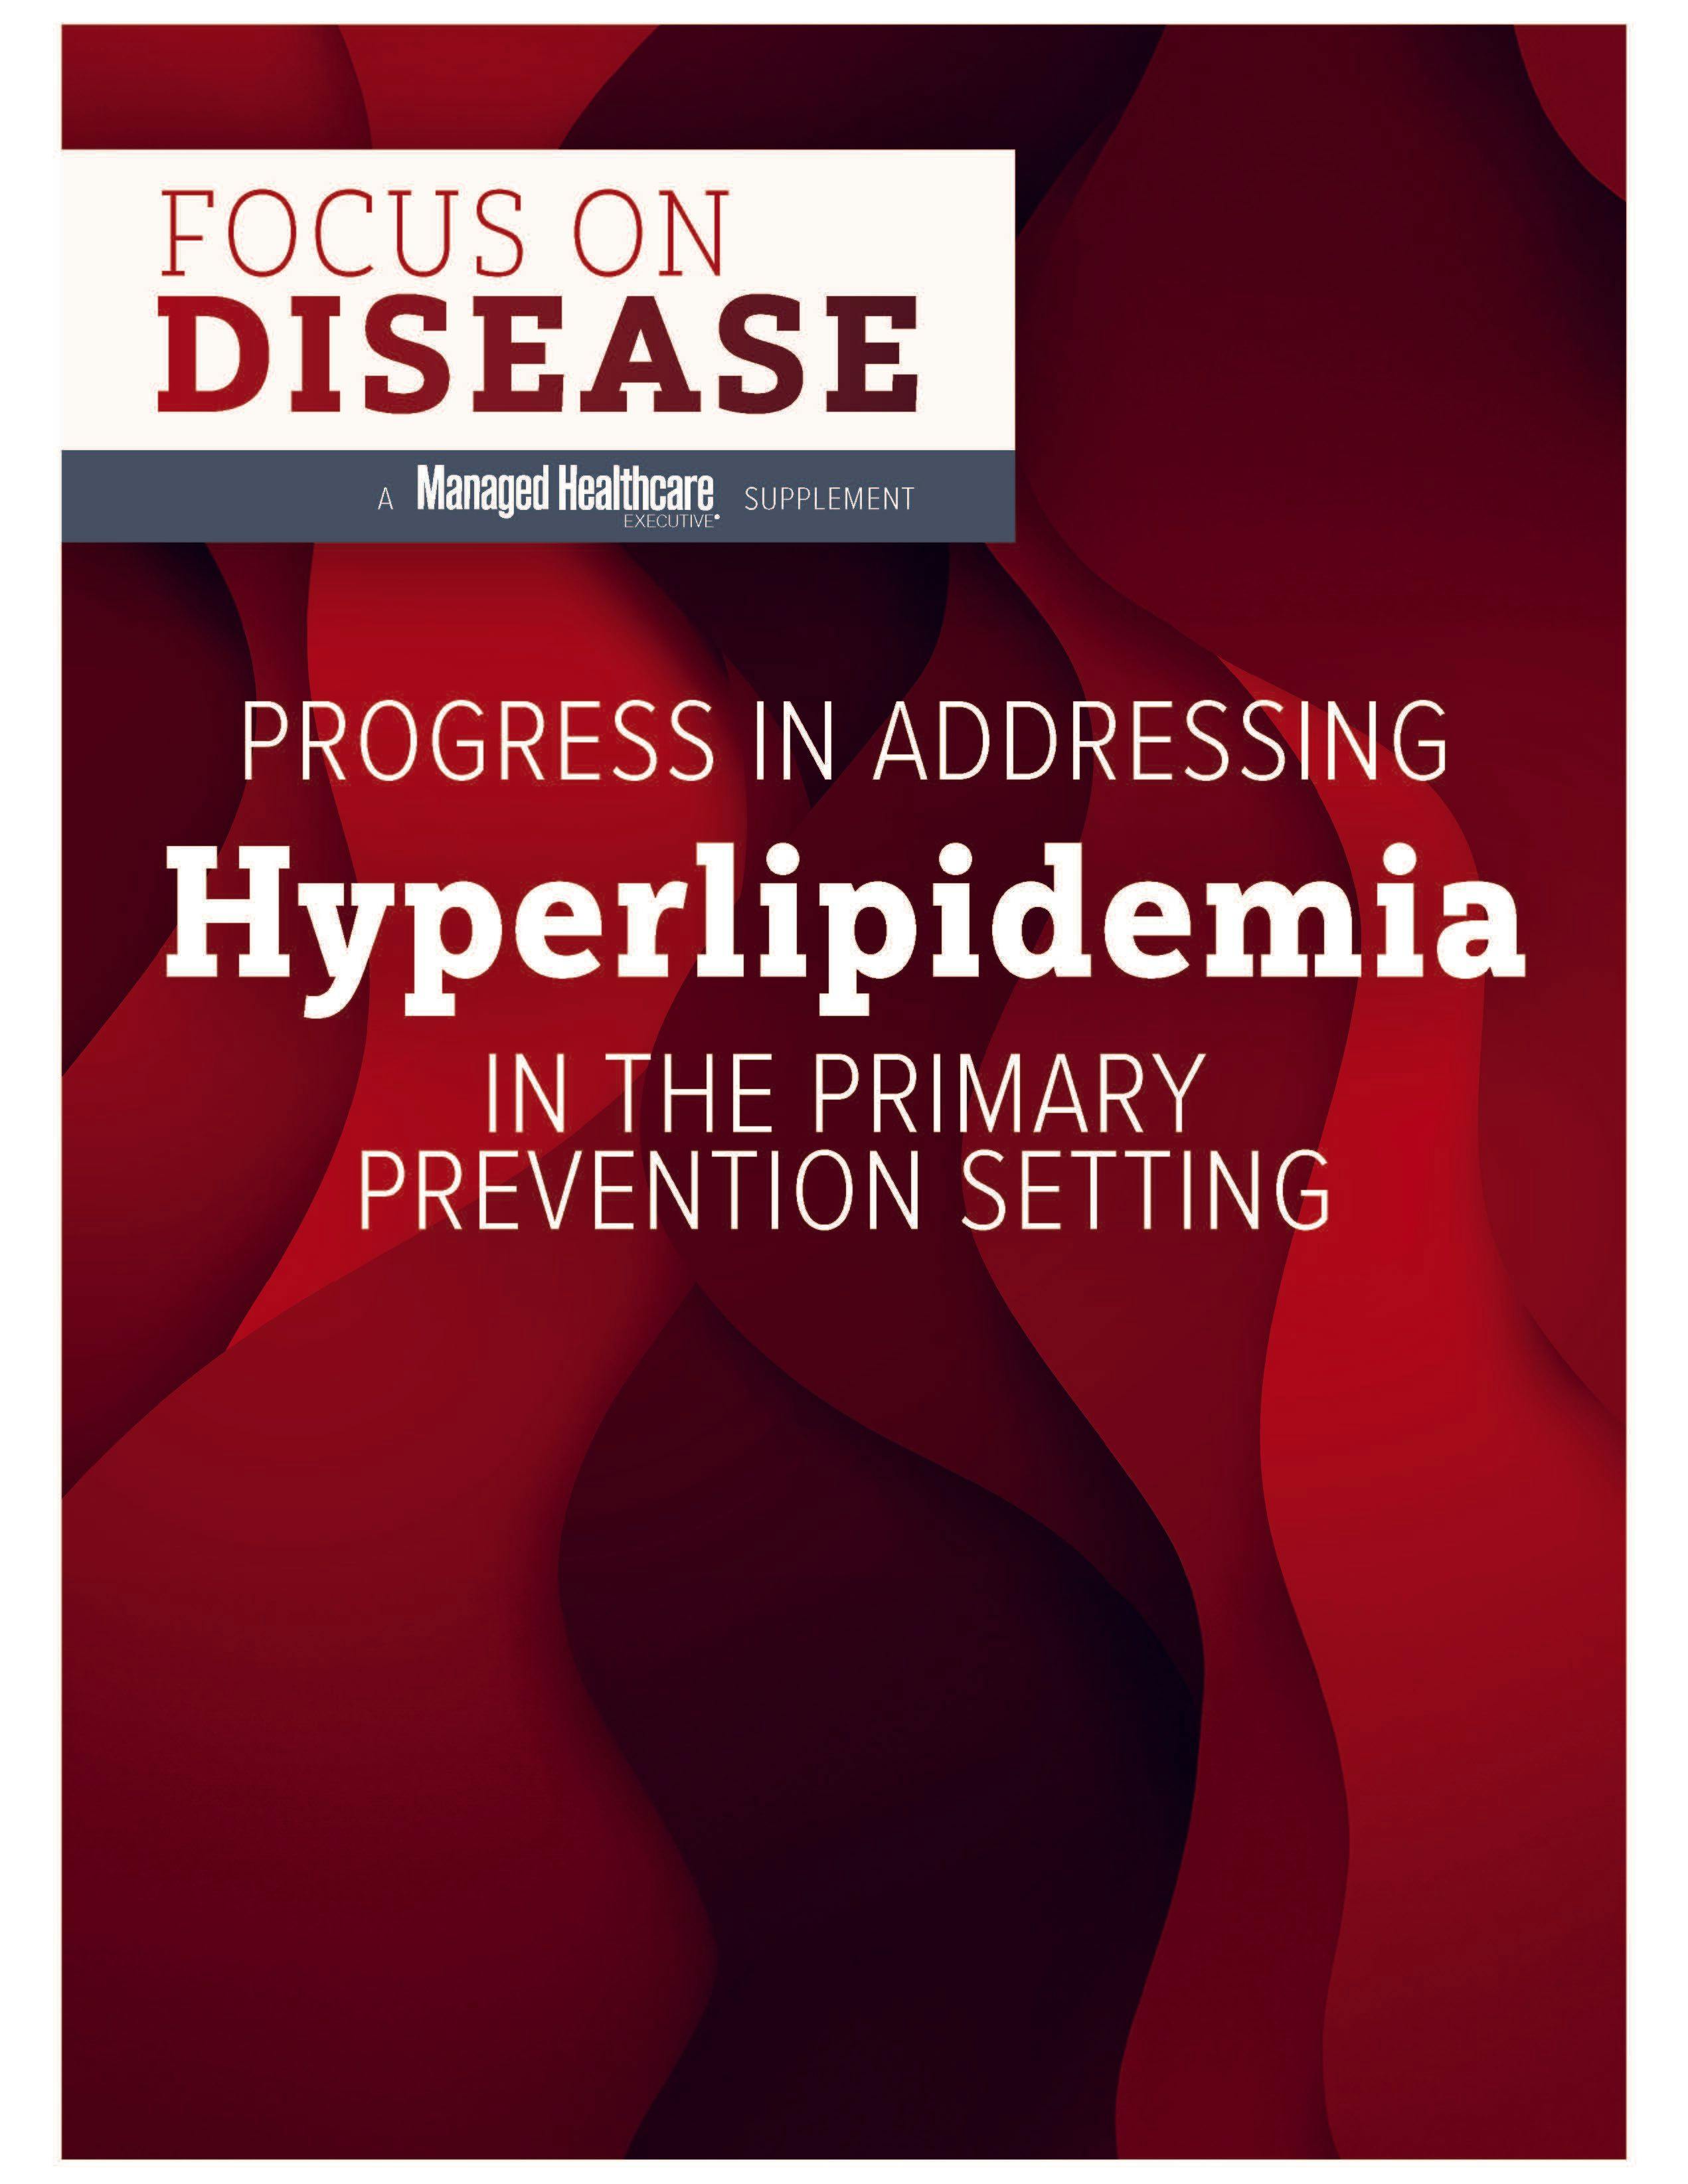 Progress in Addressing Hyperlipidemia in the Primary Prevention Setting